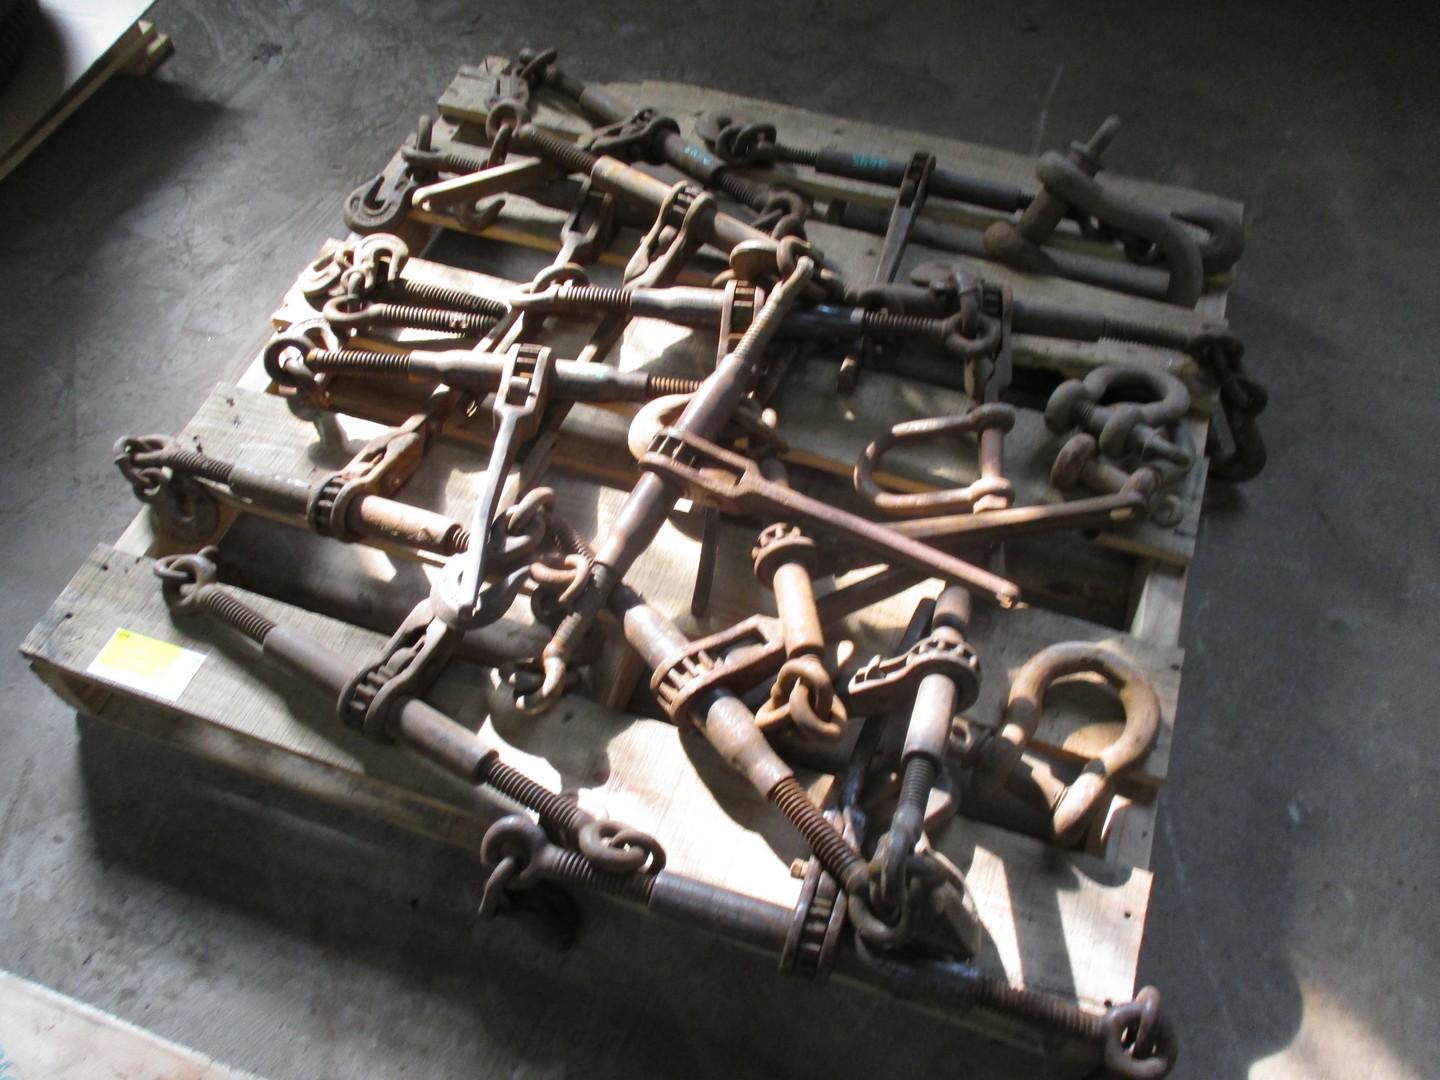 Assorted Chain Binders and Shackles